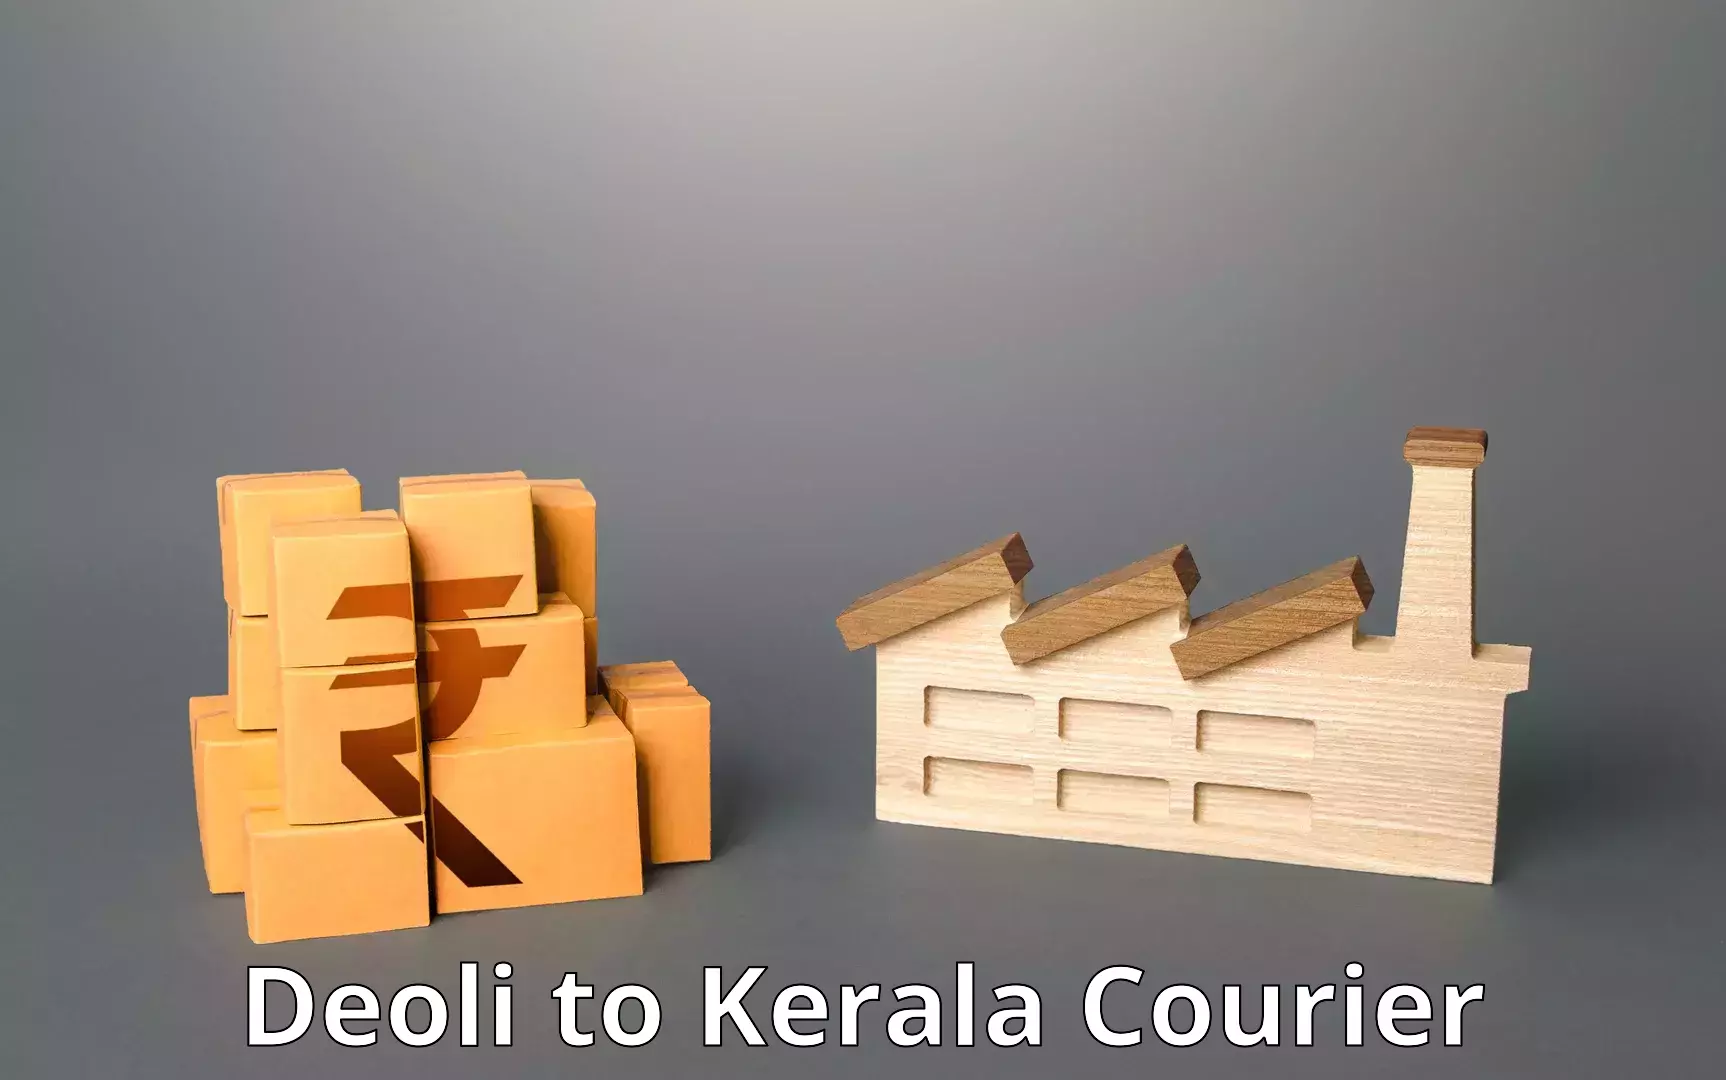 End-to-end delivery Deoli to Karunagappally